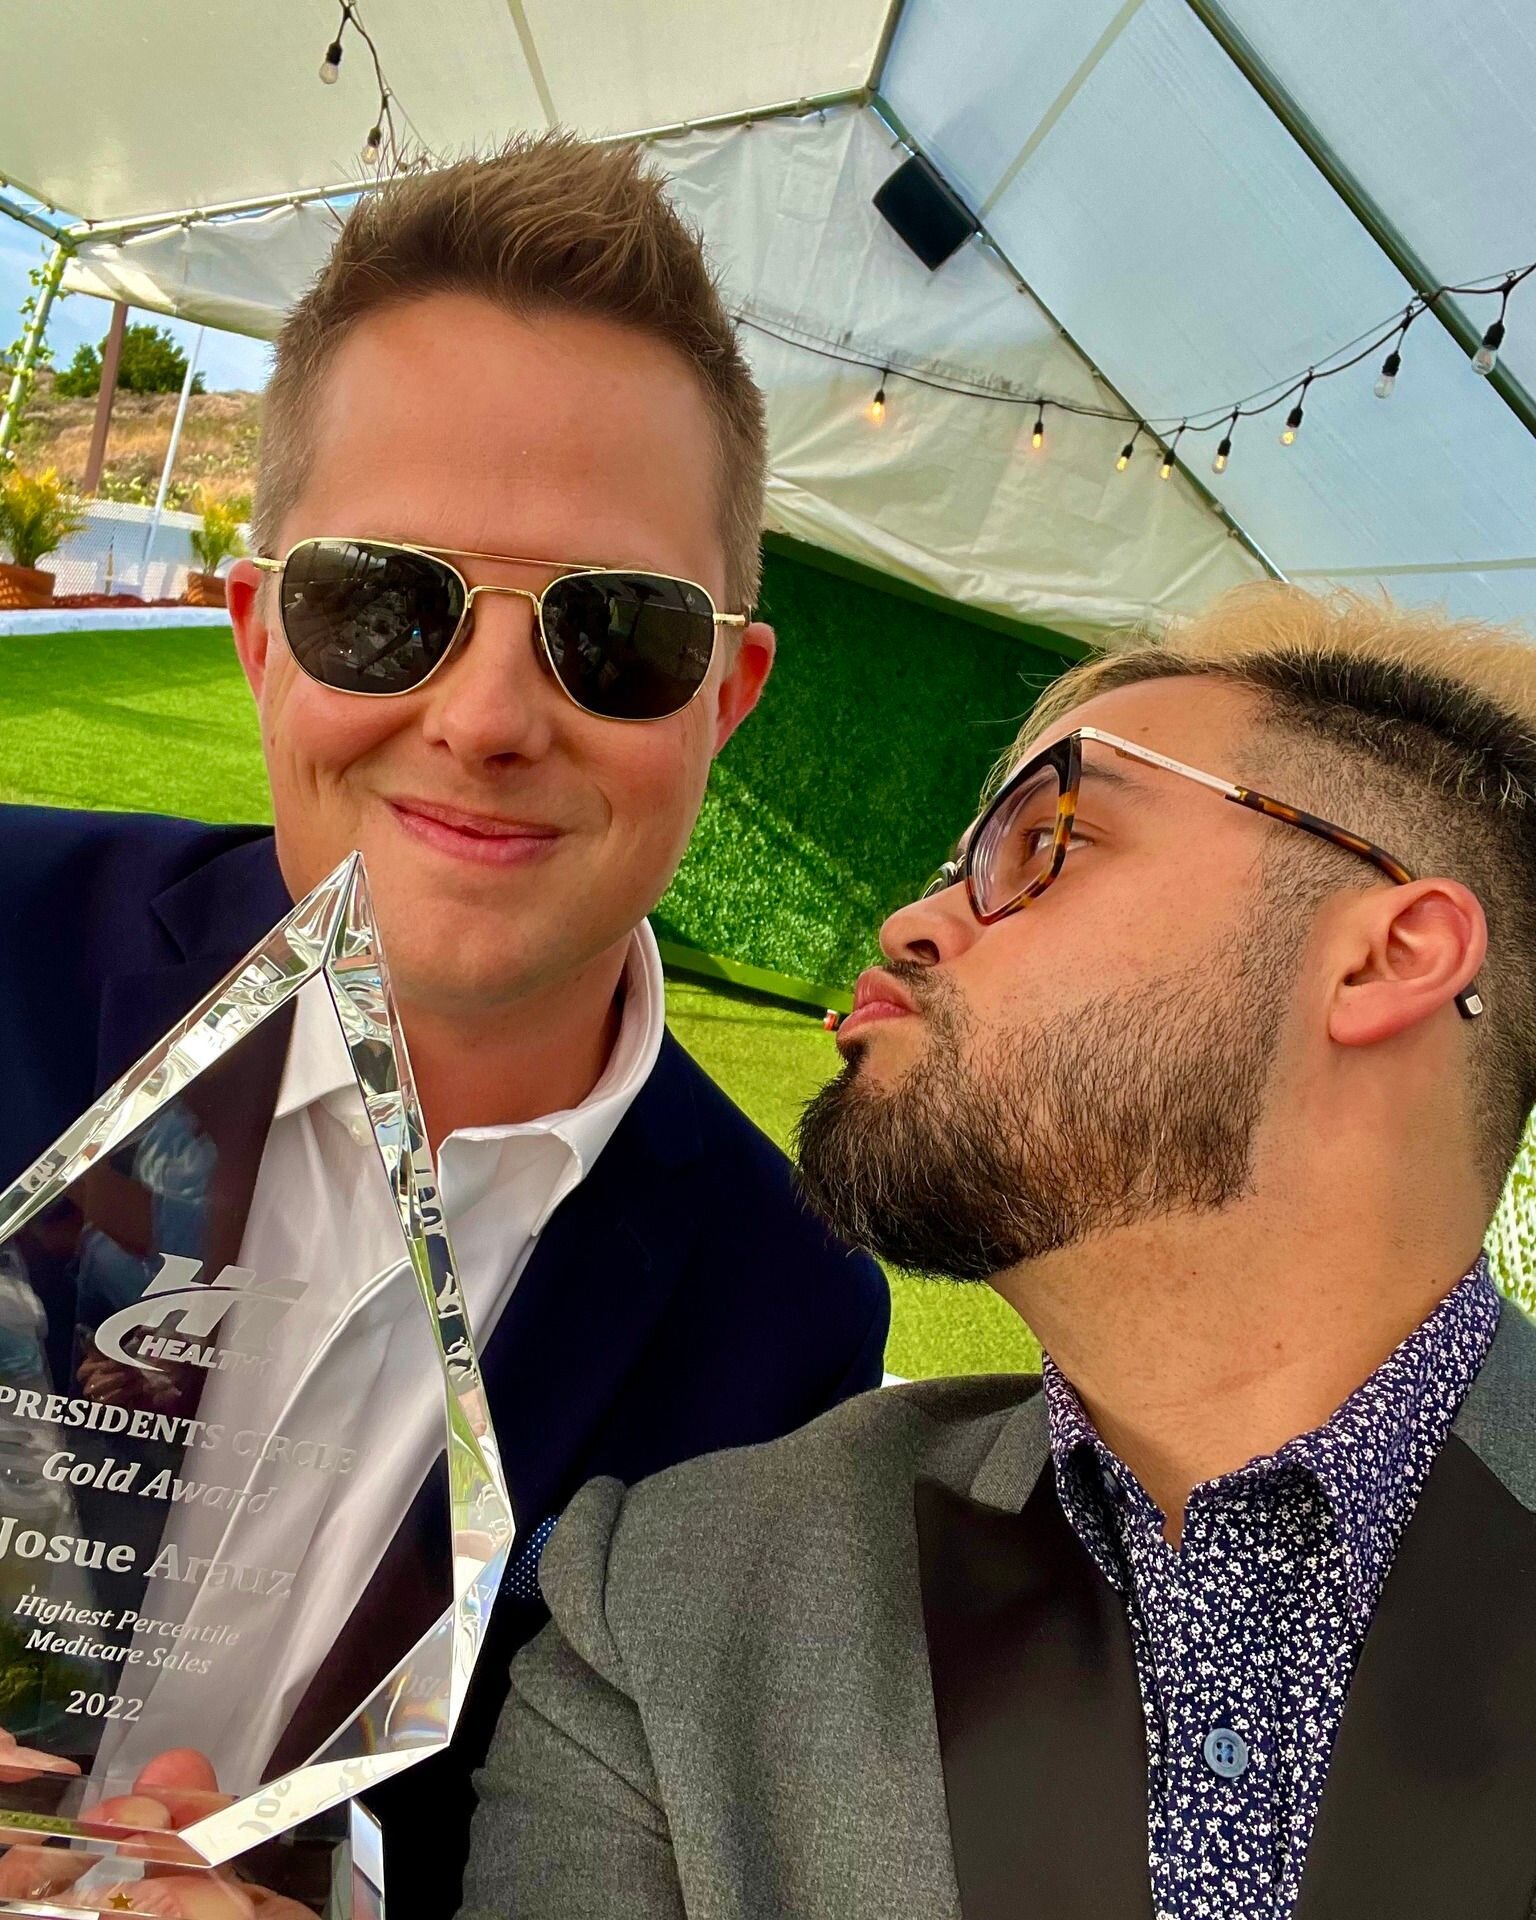 #TBT to last year when we took home a Grammy for Album of the Year. (Yeah, it definitely wasn't a Grammy, even though my guitar chops are on the rise 😏)

K, now, where were we? Oh, yeah; the moral of the story is, we like to clean up at awards event